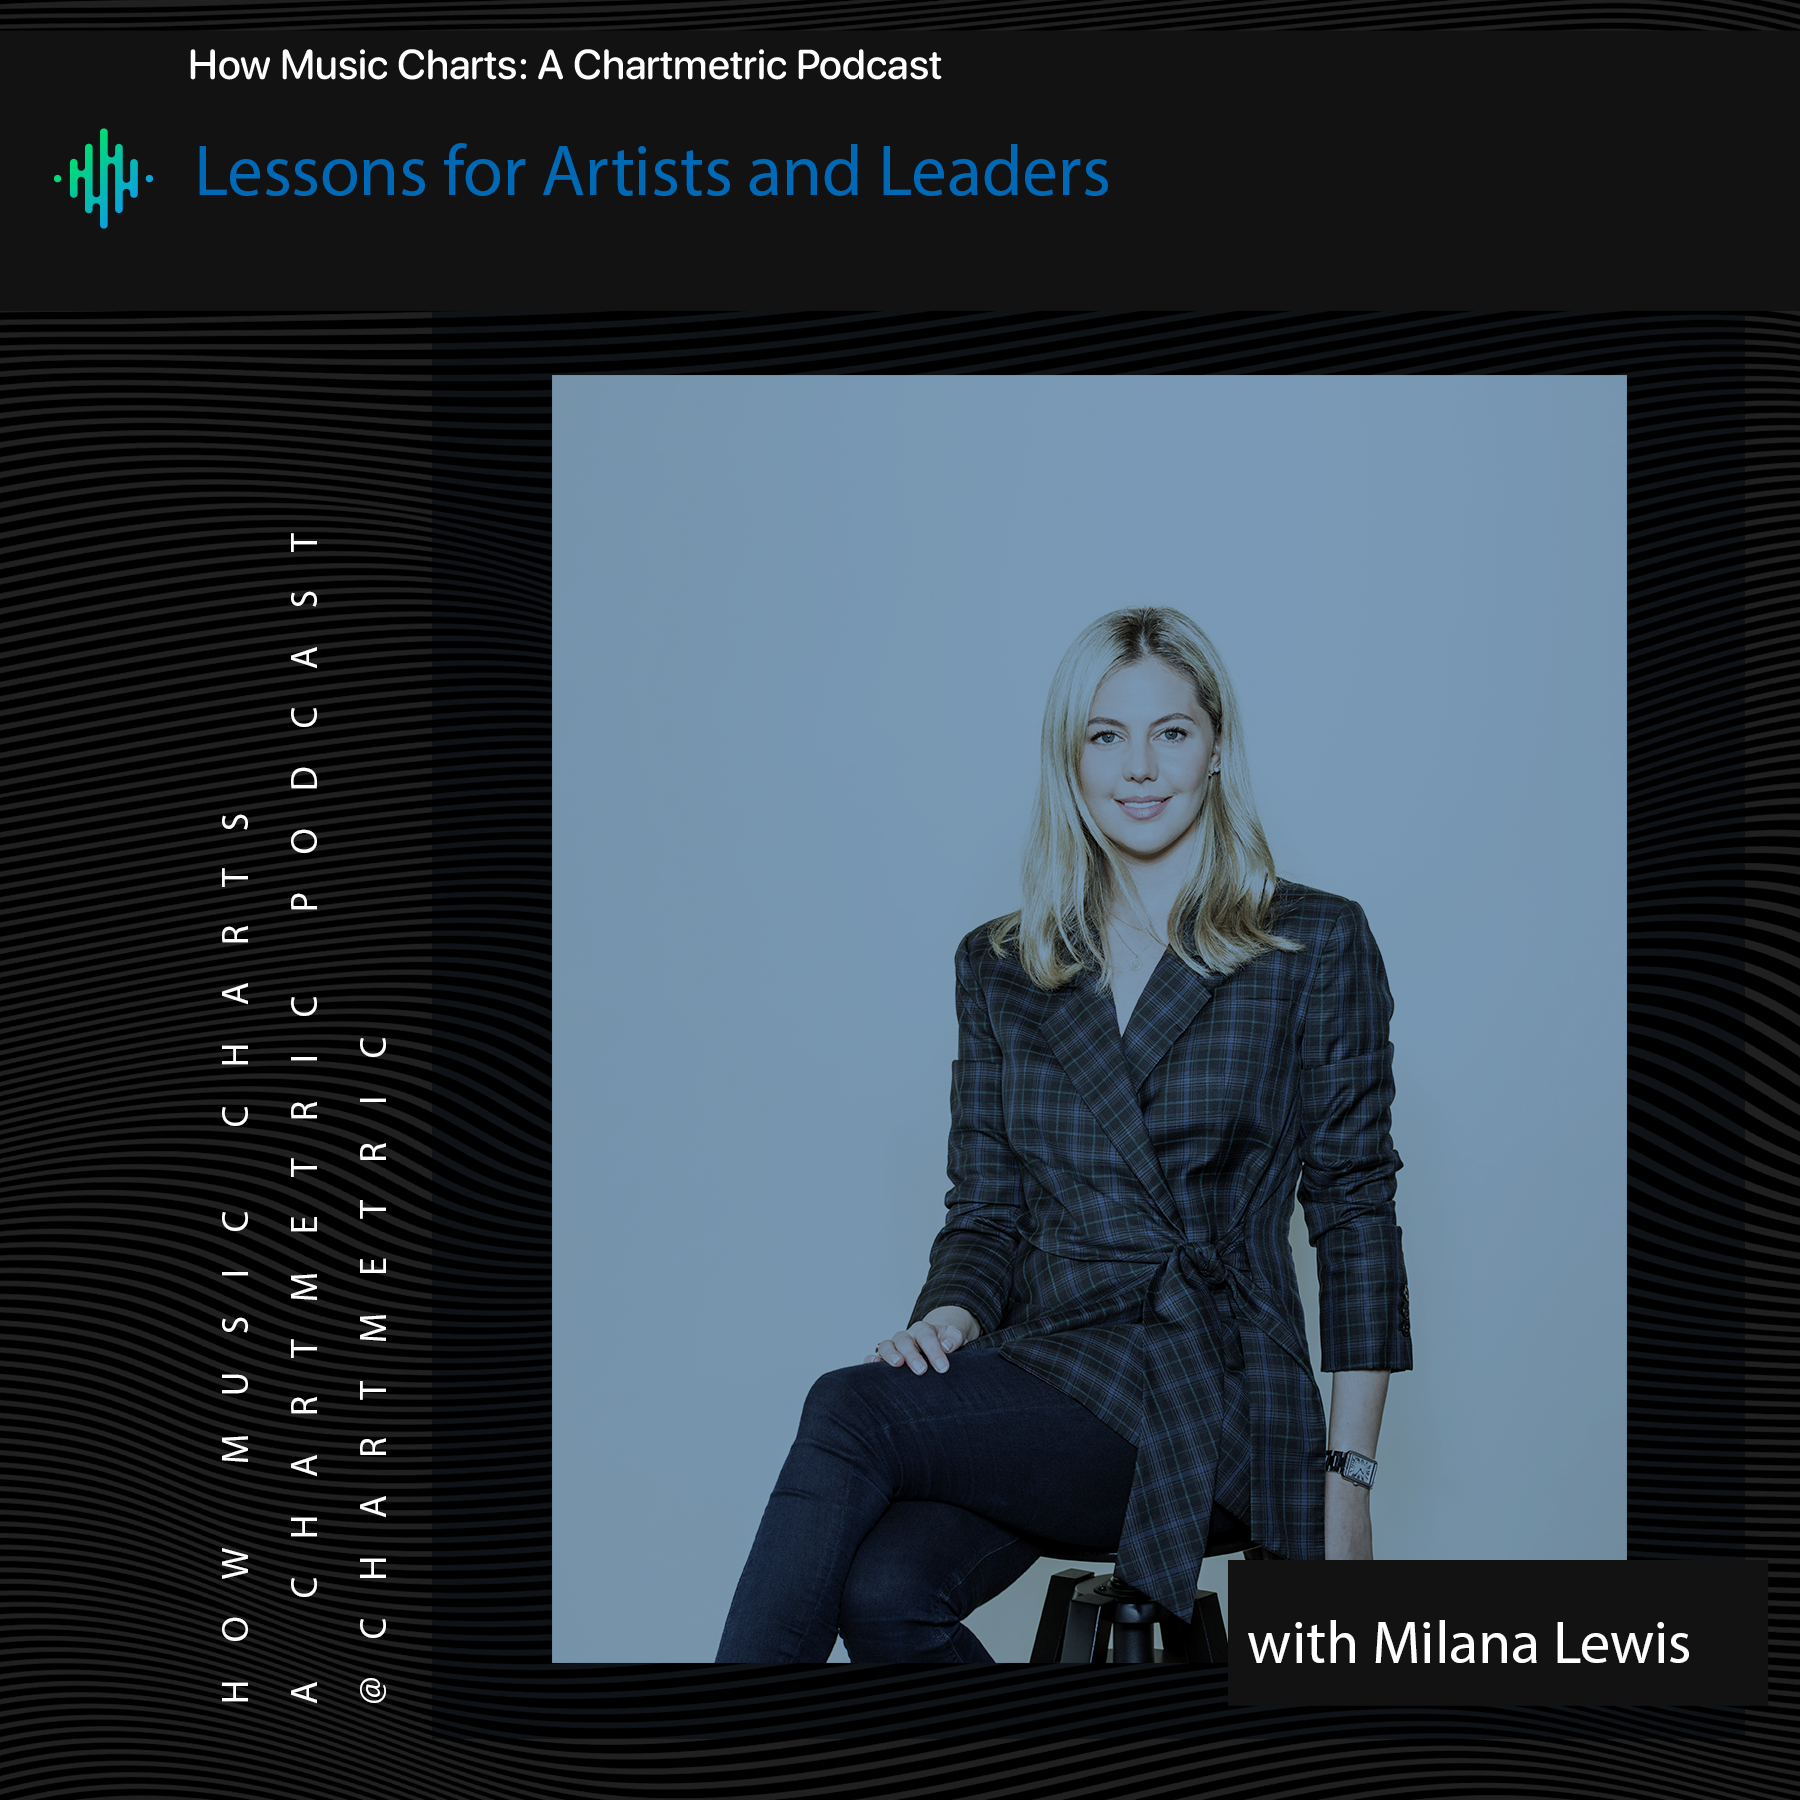 Lessons for Artists and Leaders With Stem CEO Milana Lewis